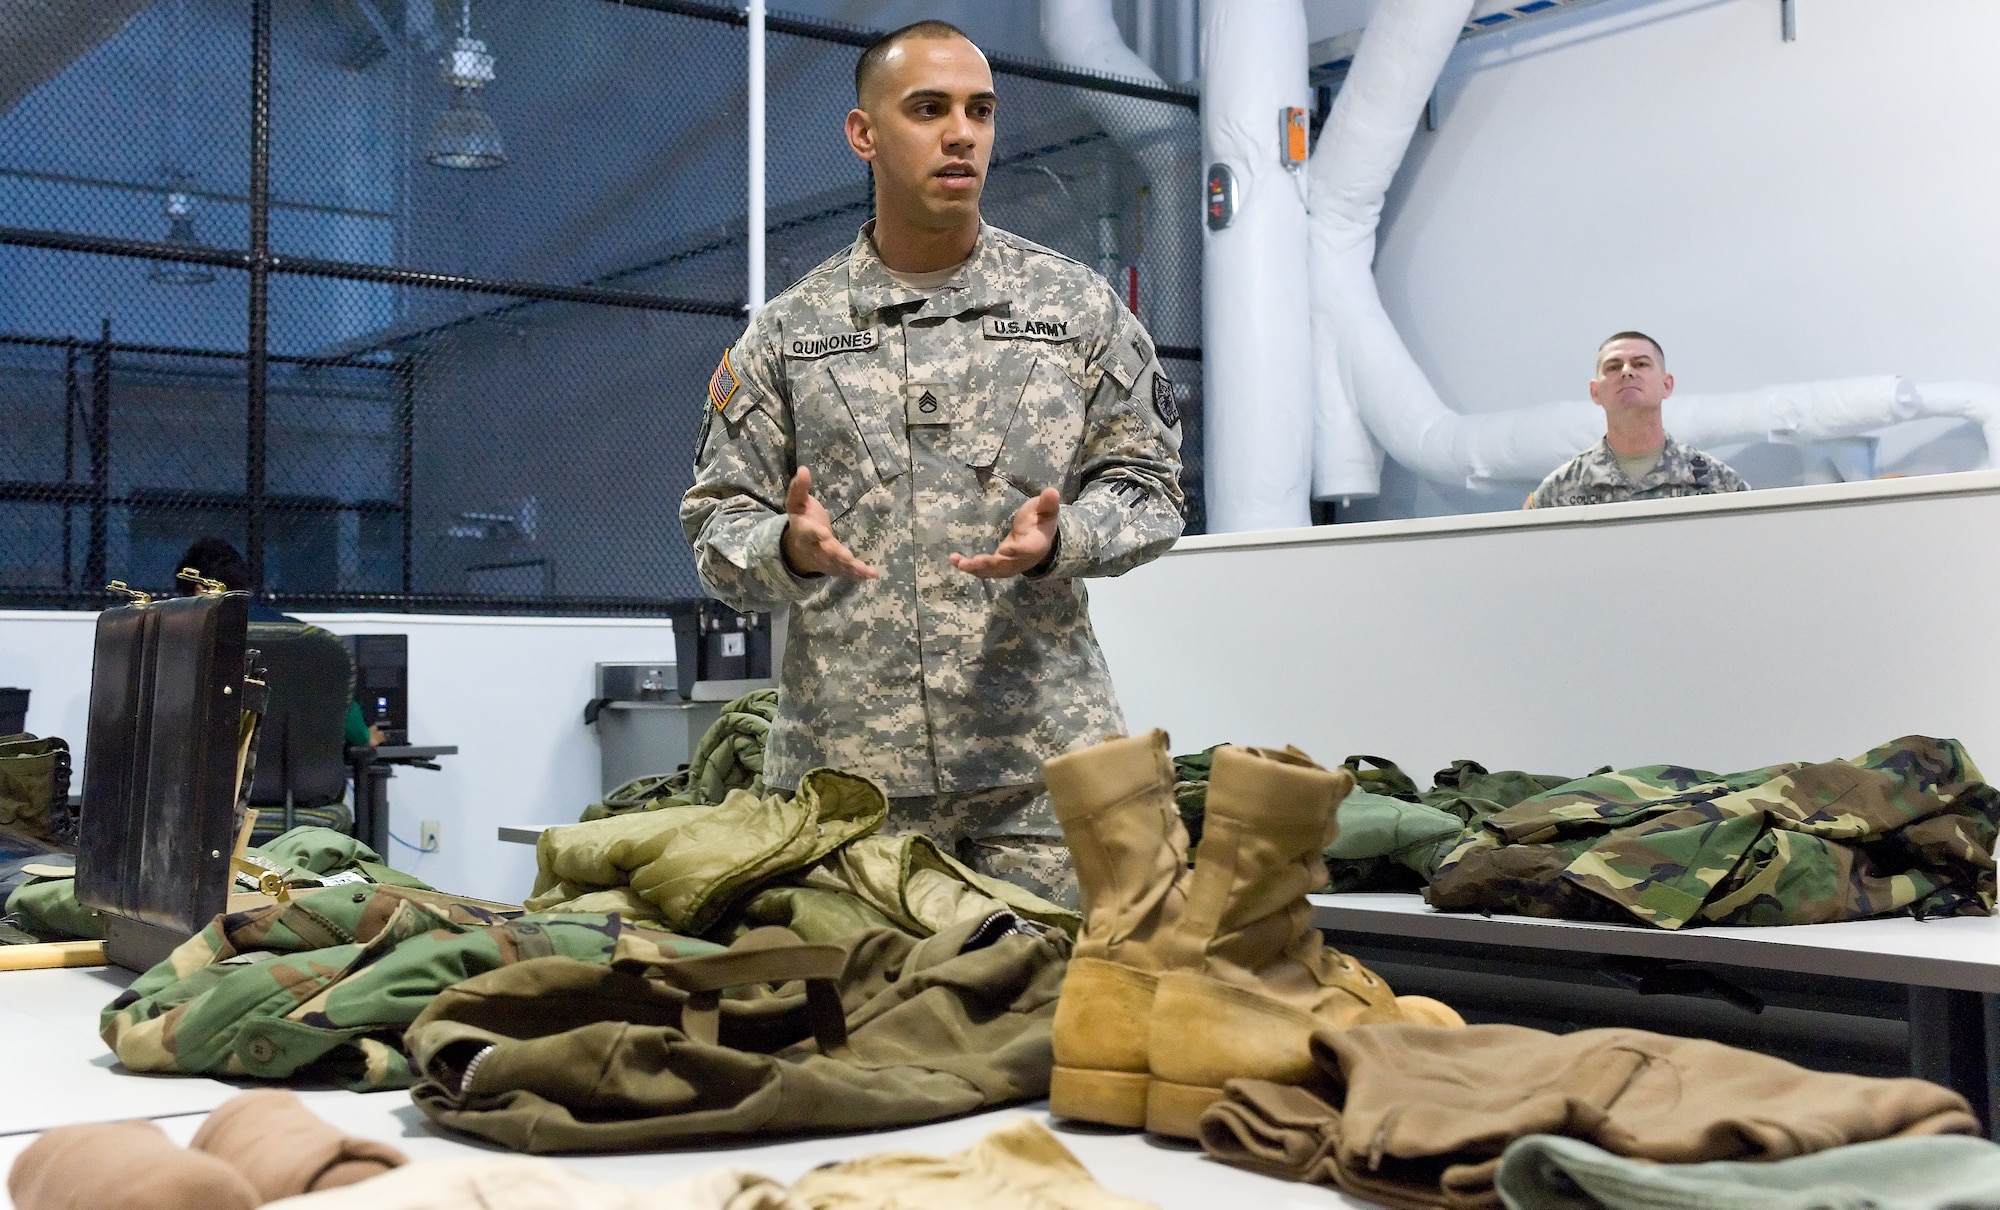 Army Staff Sgt. Luis Quinones speaks to the media about inventory process April 14, 2011, at the new Joint Personal Effects Depot at Dover Air Force Base, Del. The equipment displayed simulates the actual gear that is processed at JPED. (U.S. Air Force photo by Roland Balik)